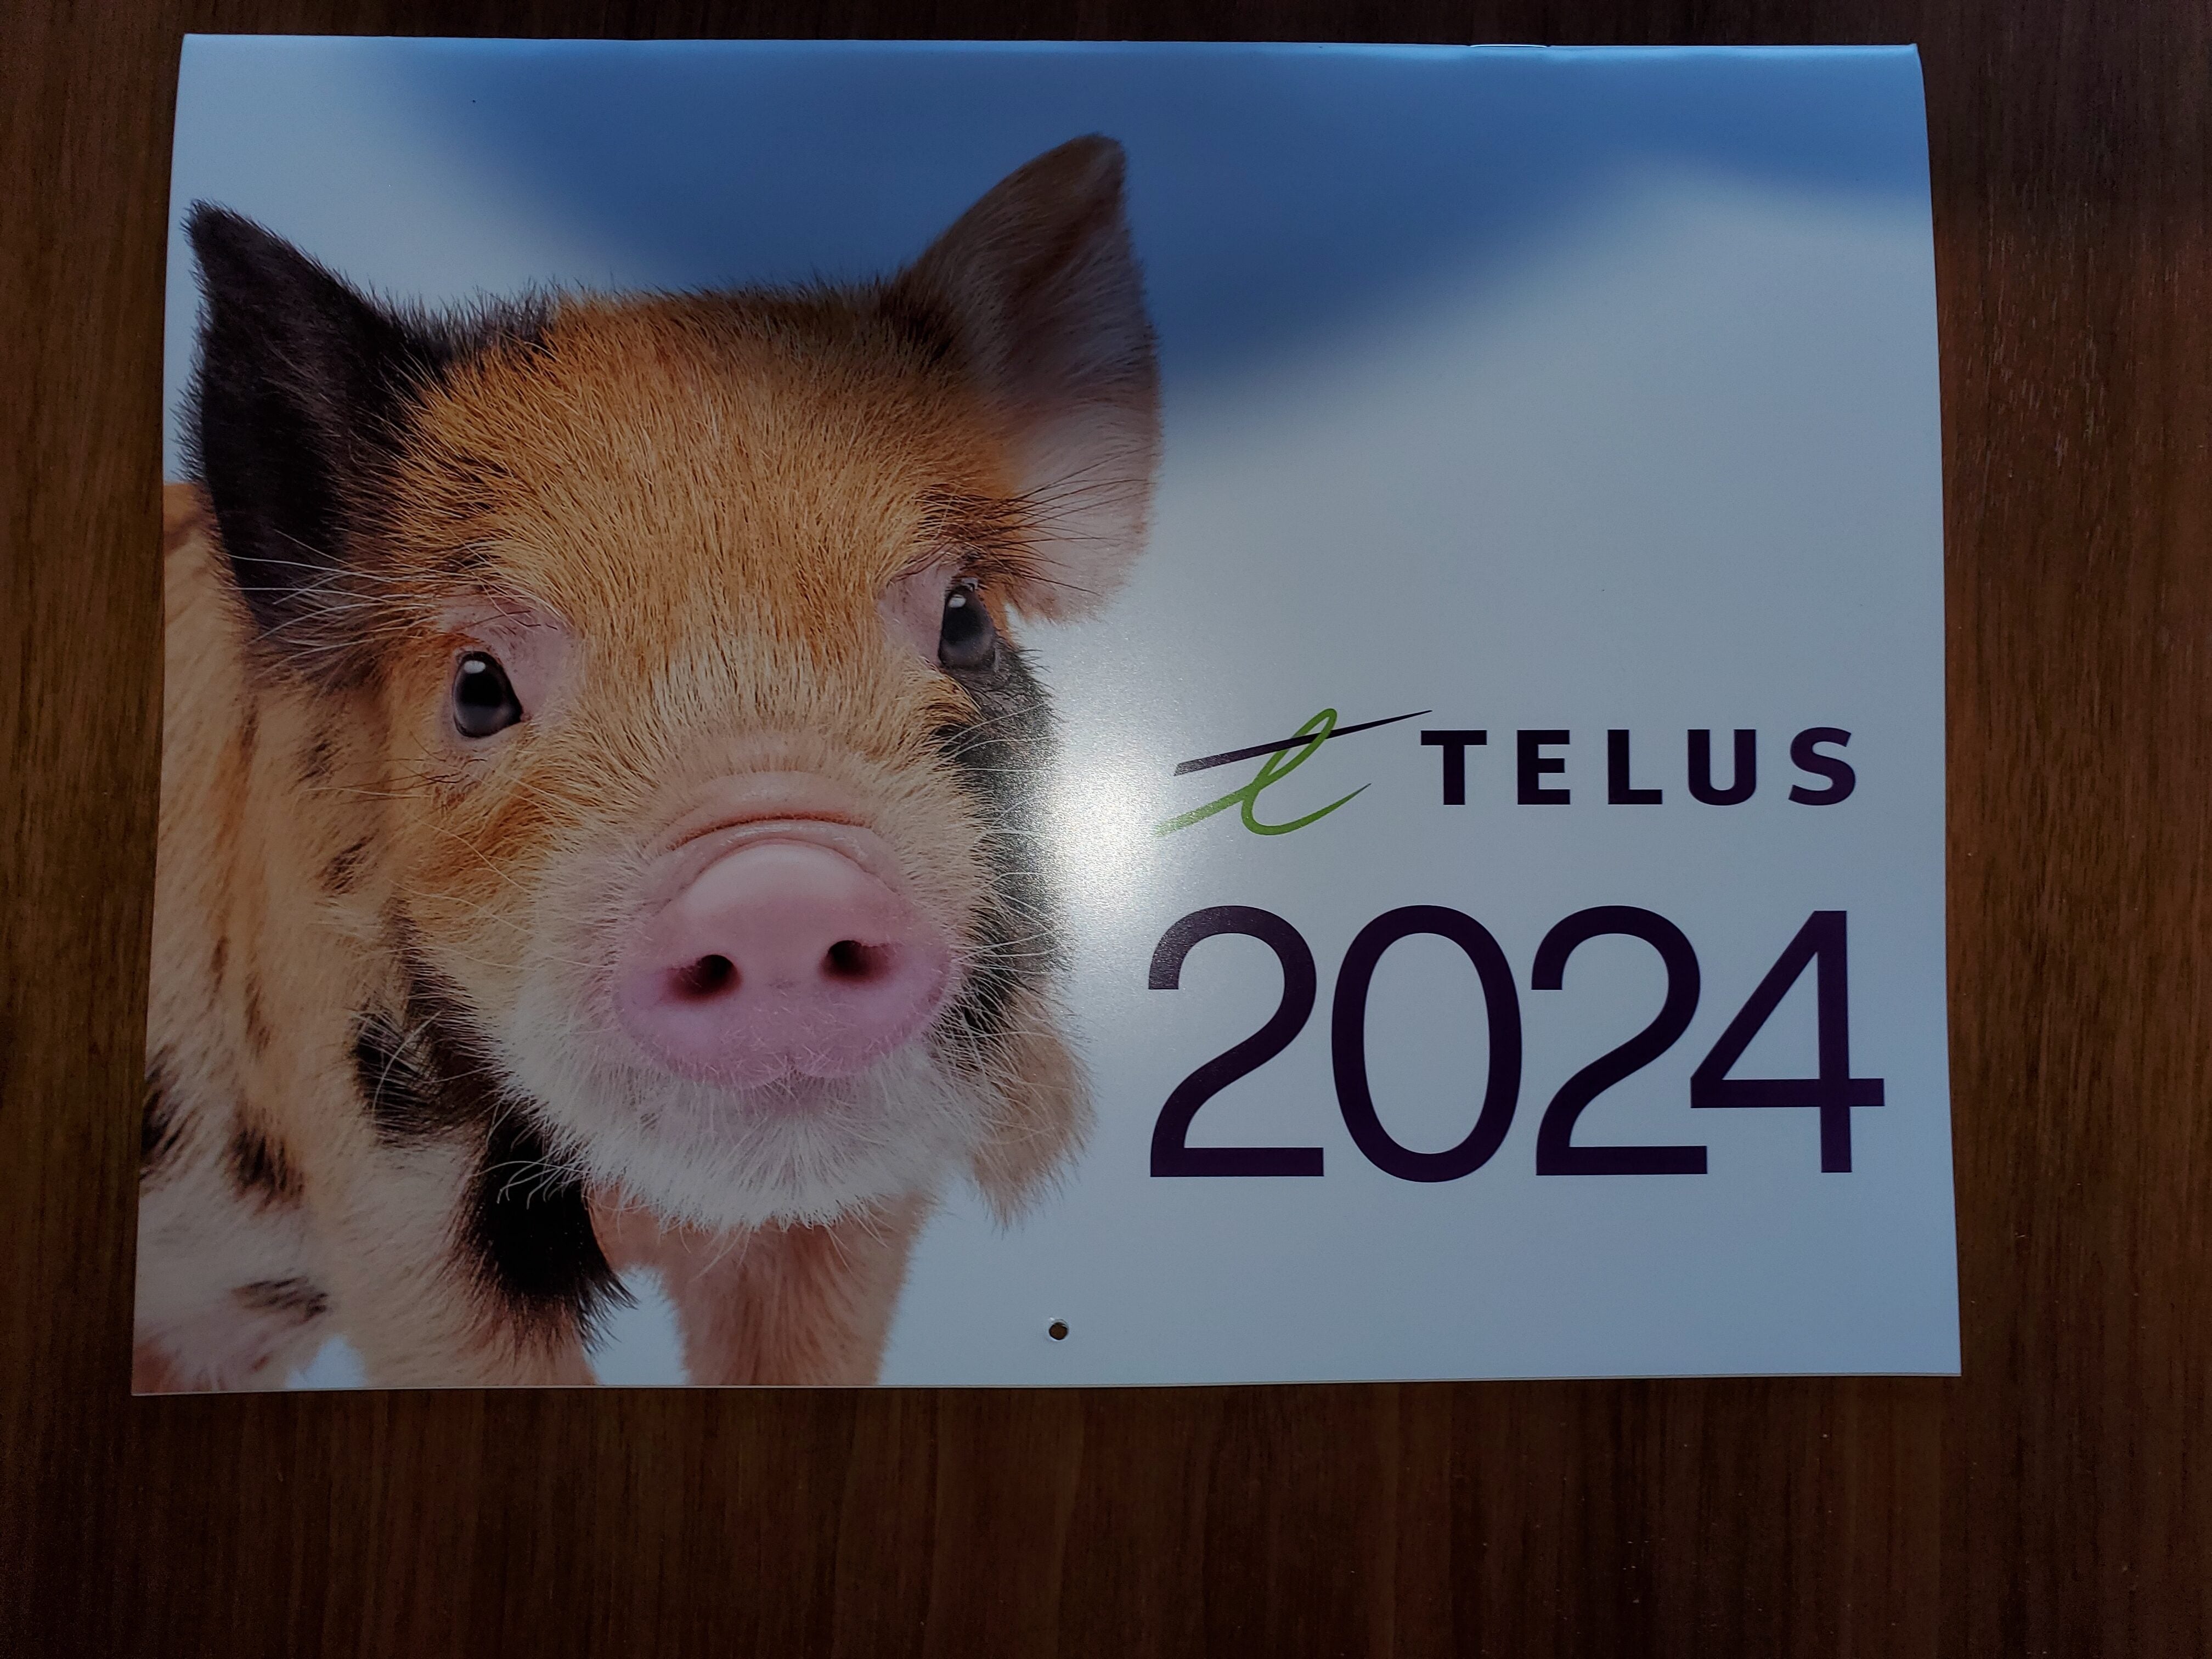 [Telus] 2024 Calendars are free for Telus Customers and limited to one